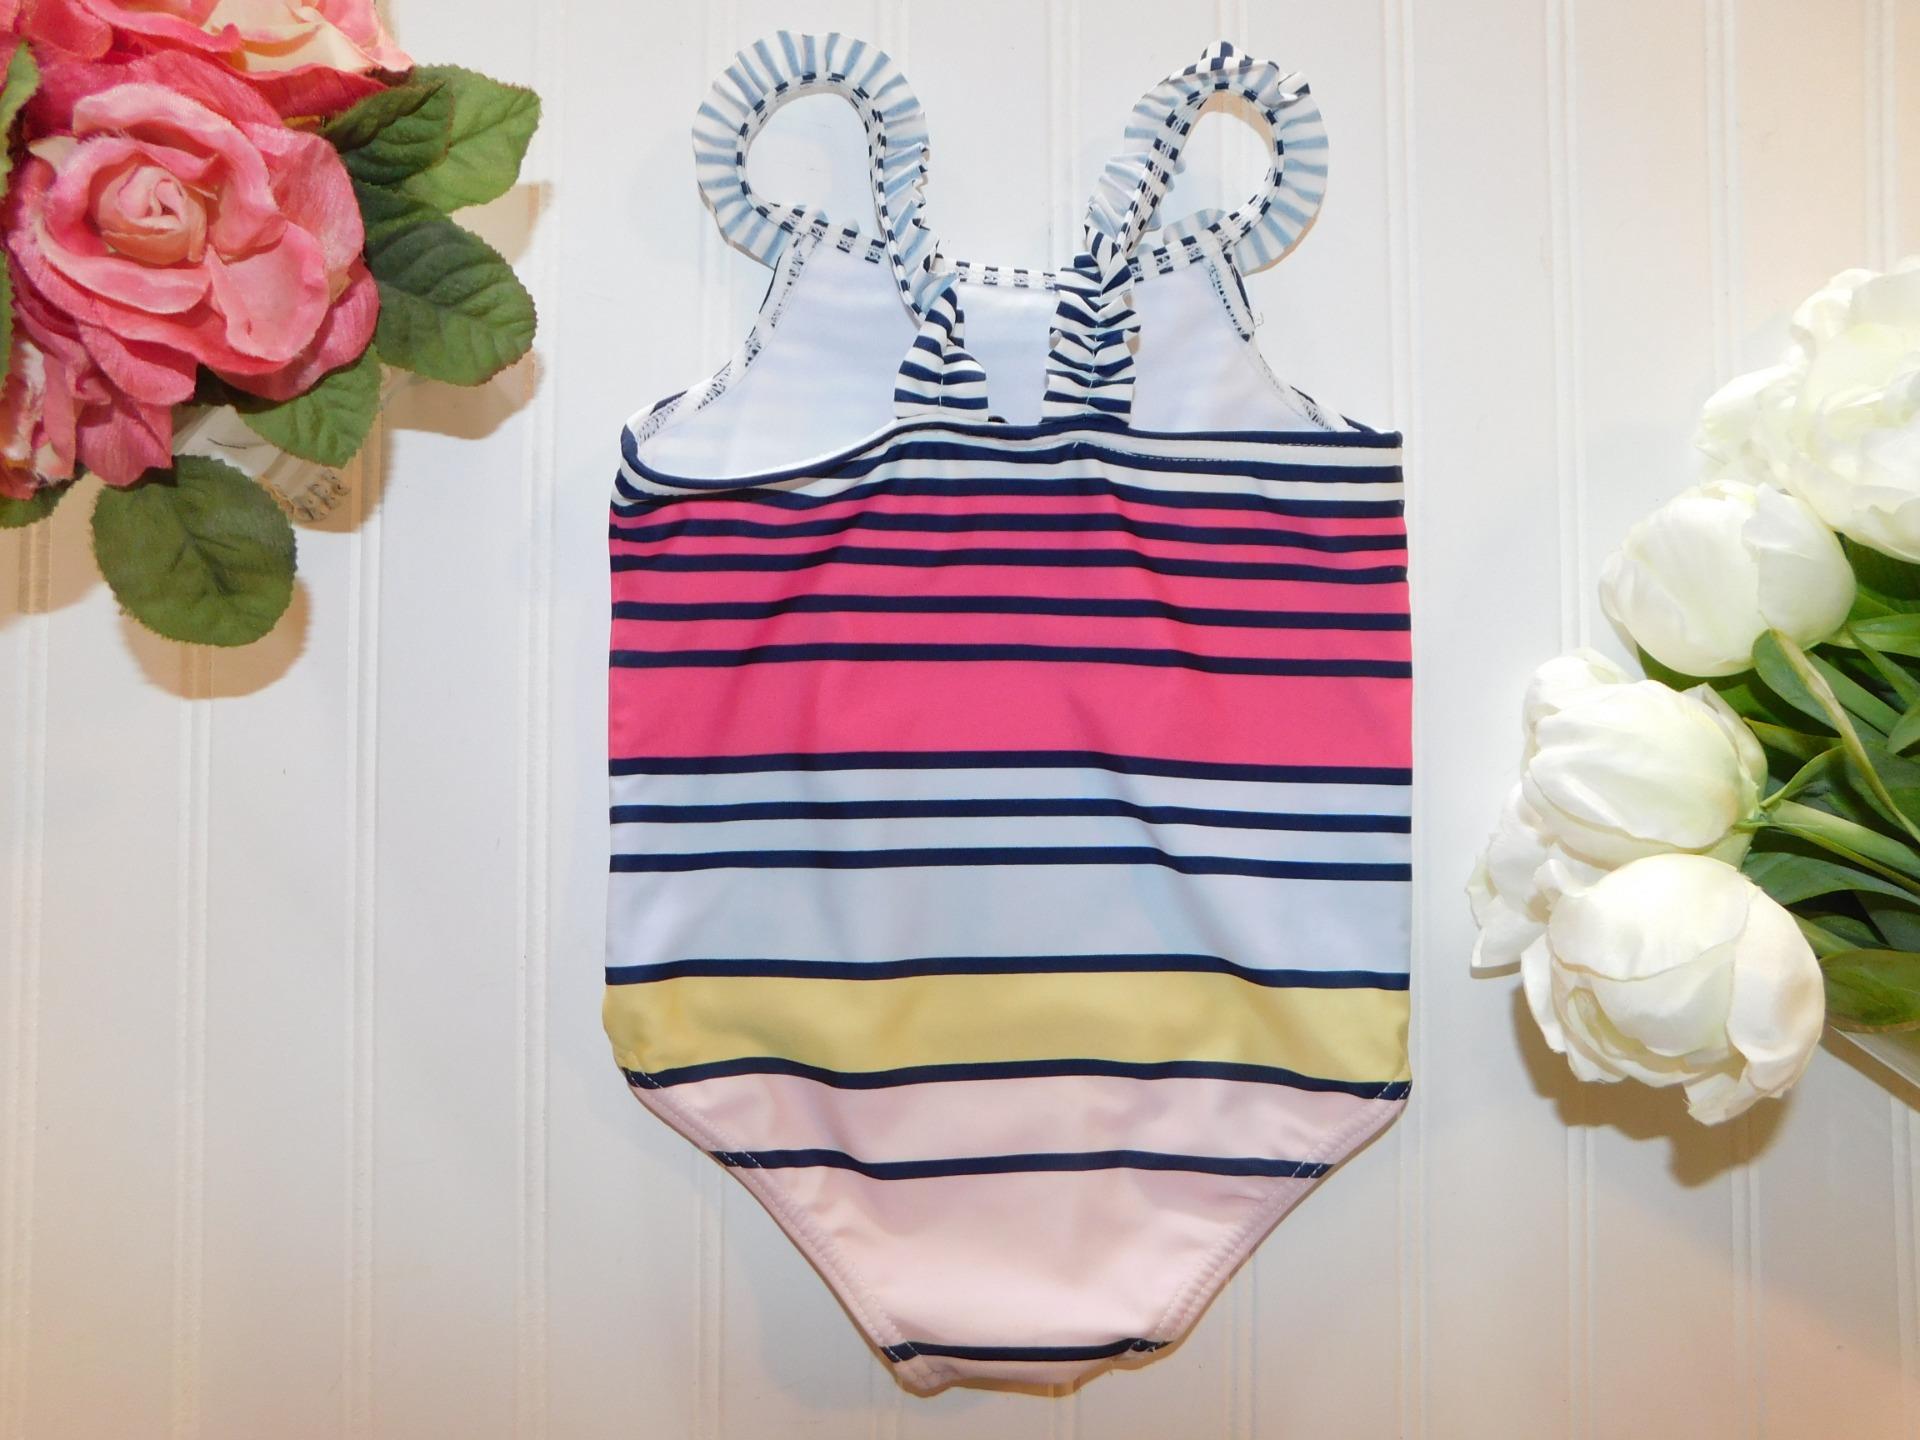 Juicy Couture Girls 18-24 Months Stripe Ruffle Swimsuit Bathing Suit ...